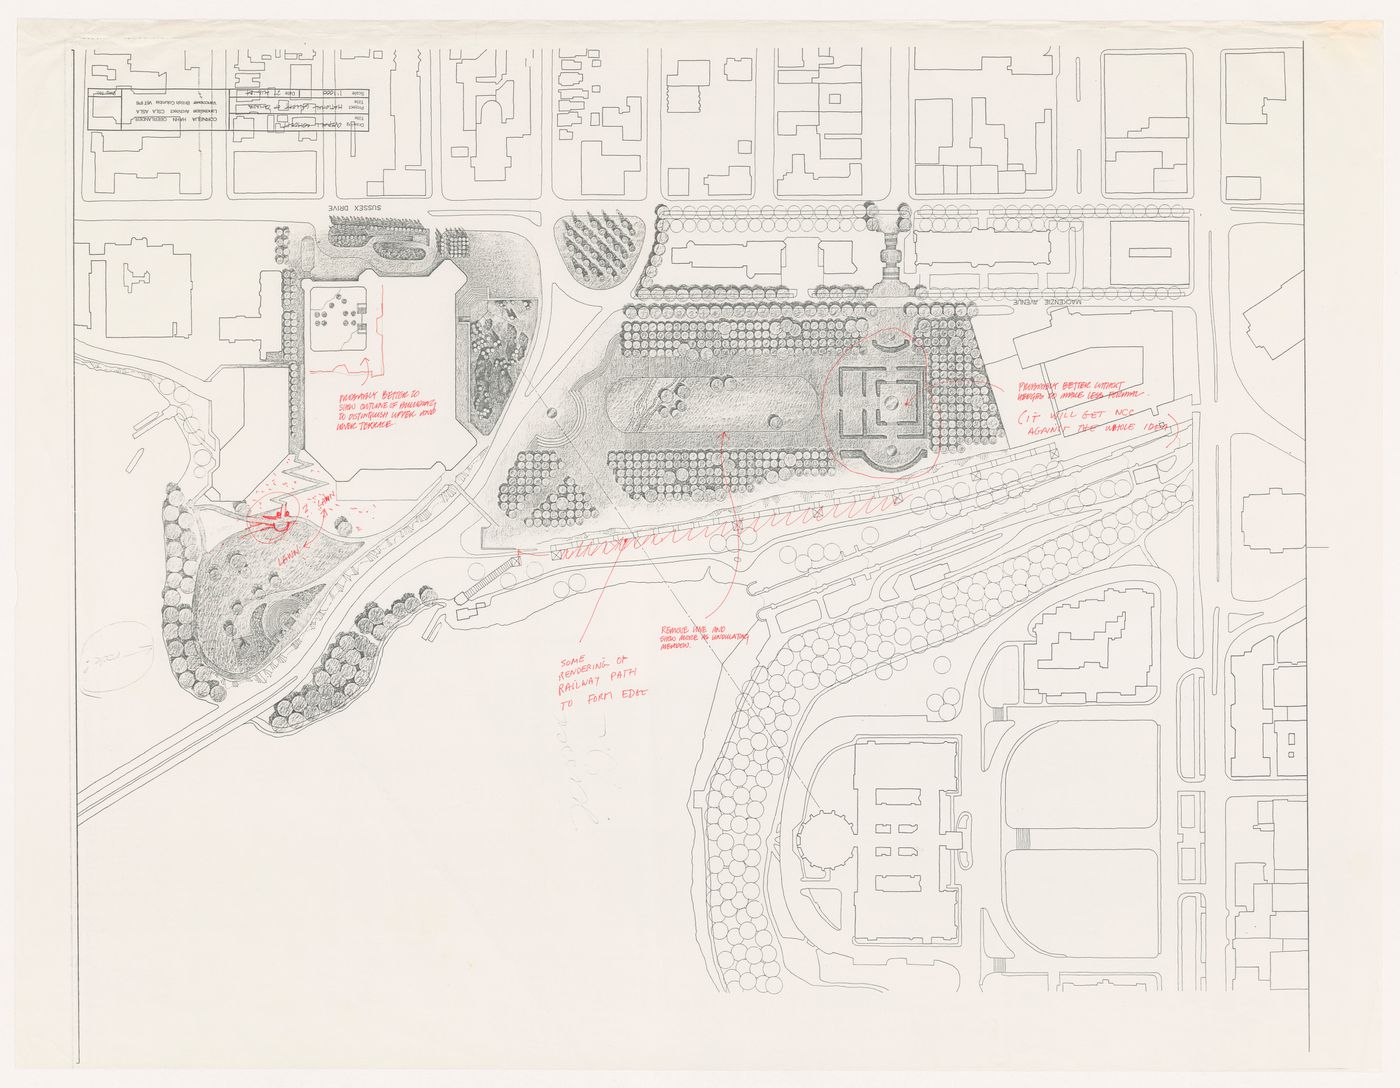 Landscape plan with annotations for National Gallery of Canada, Ottawa, Ontario